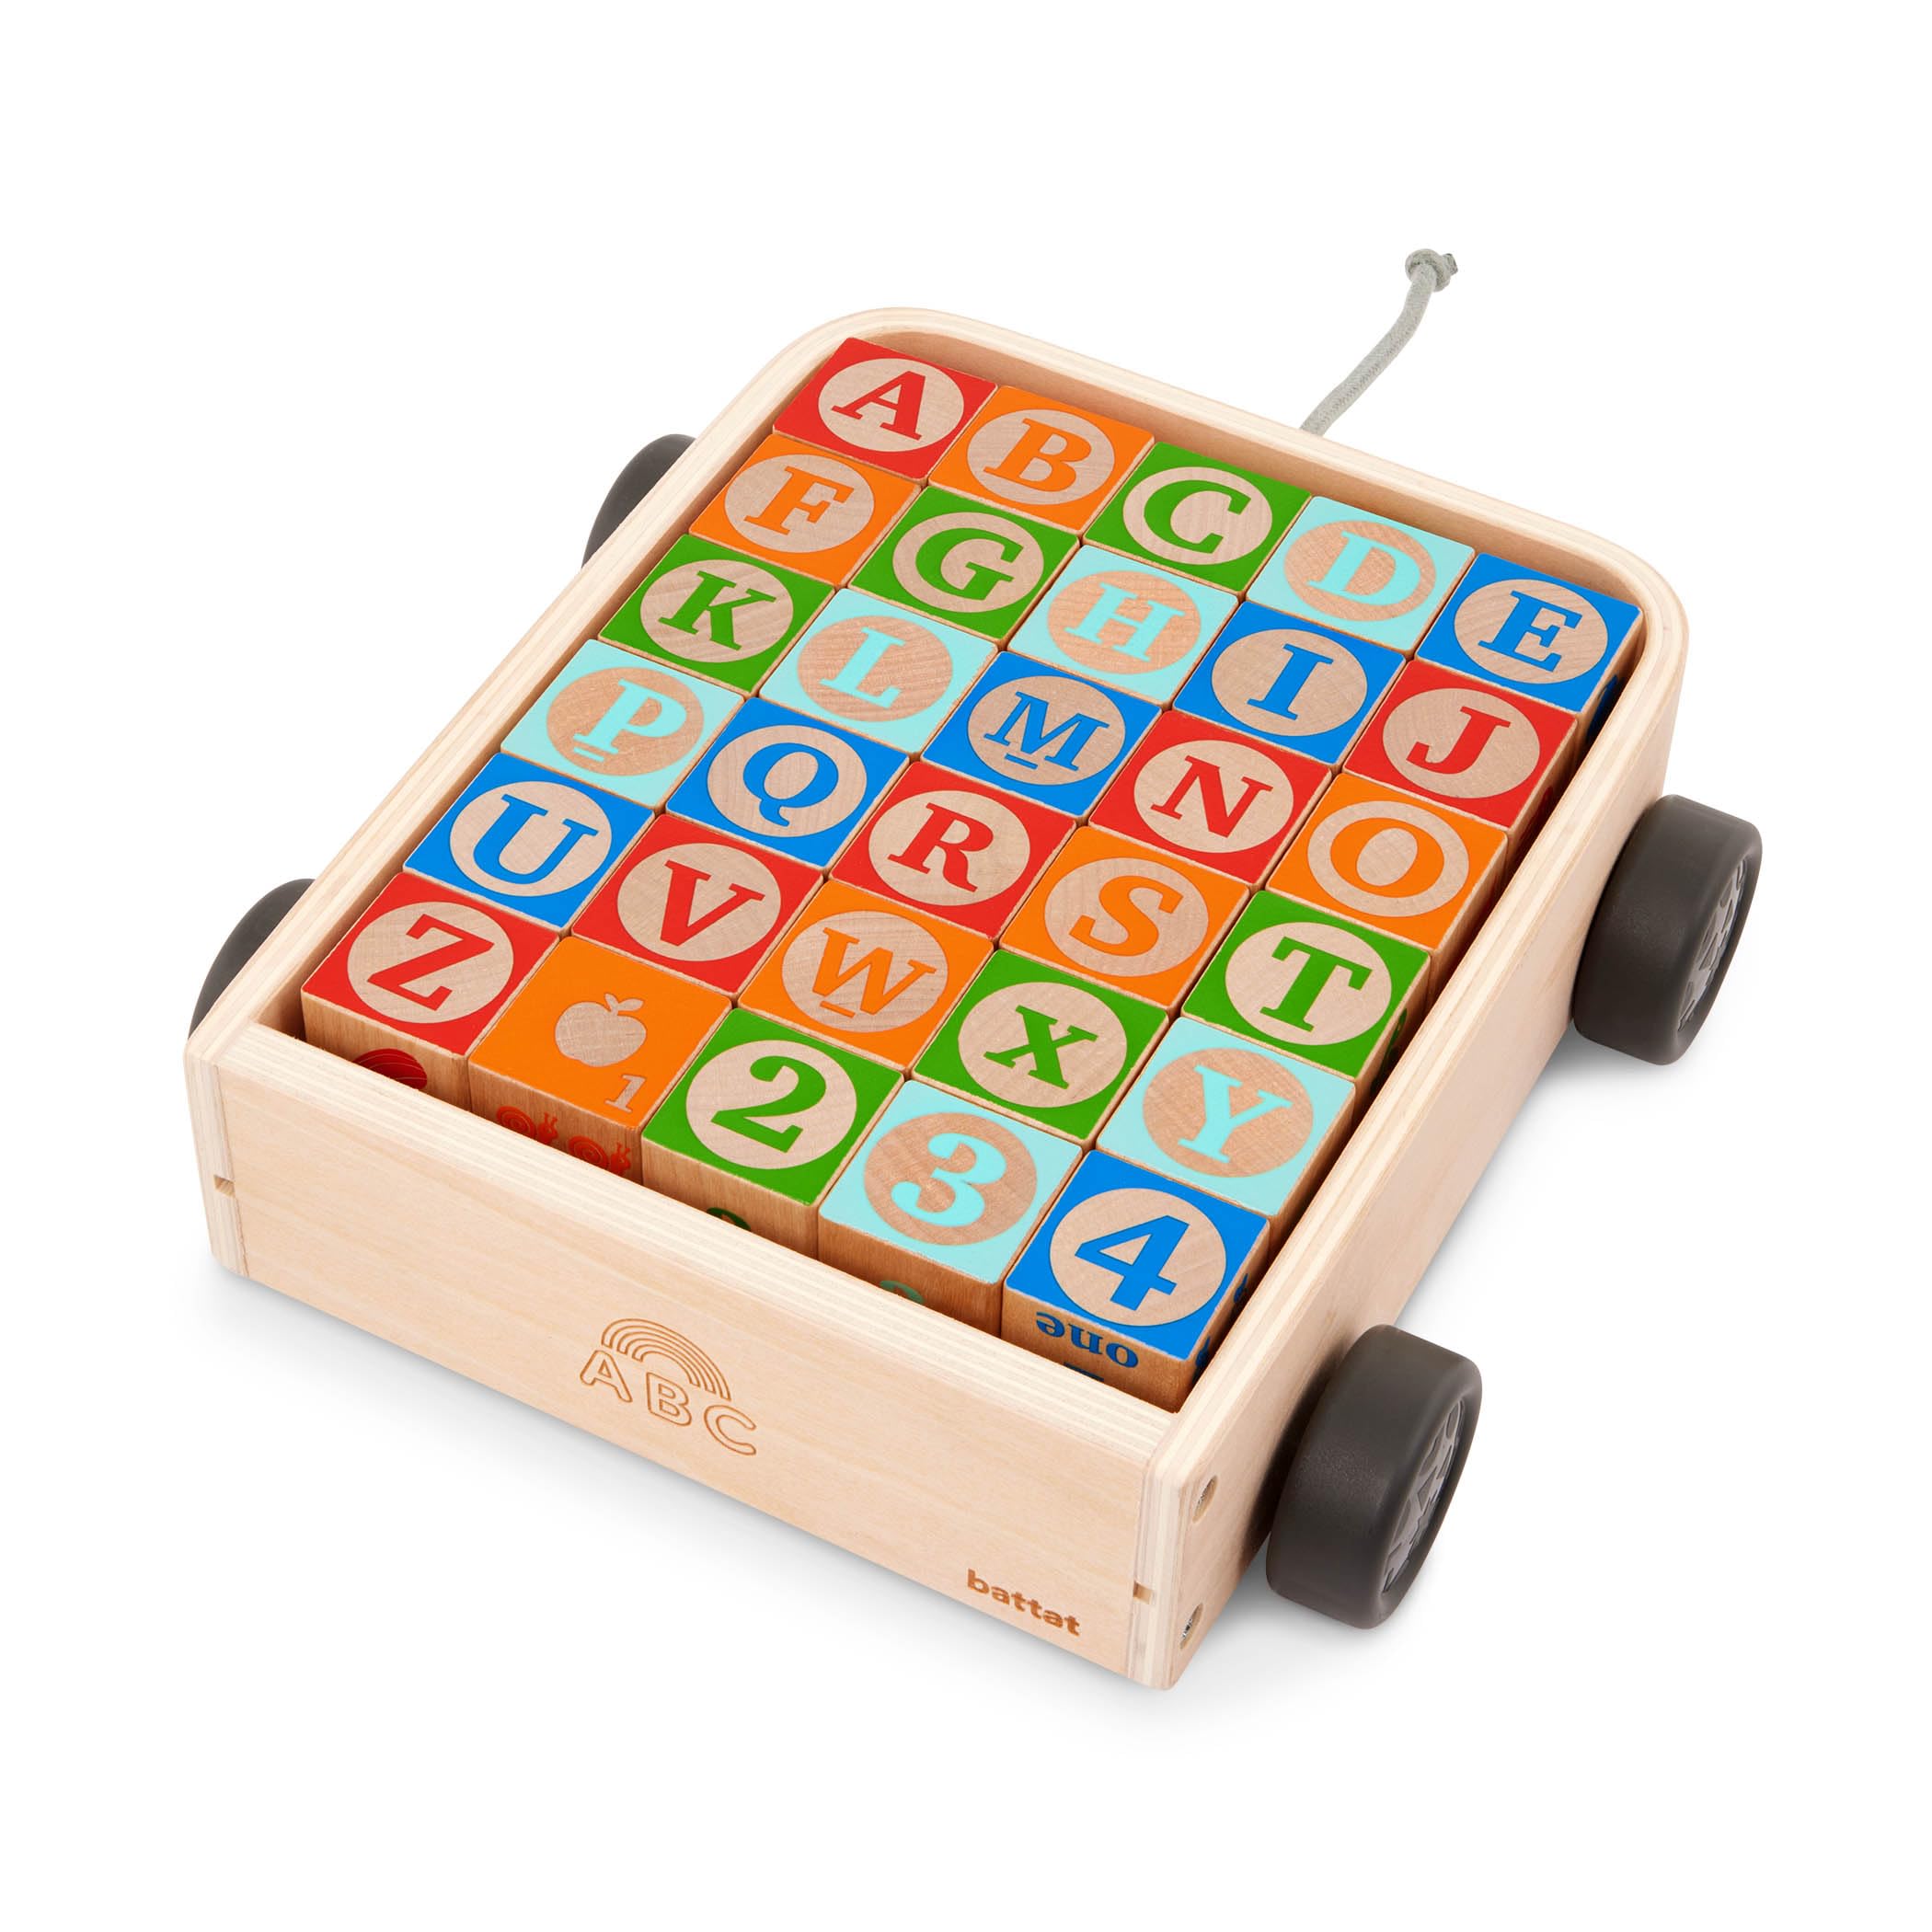 Battat – Wooden ABC Block Wagon- 26 Upper & Lower Case Alphabet Blocks & Number with Storage Wagon- Stacking Toy- Educational Toy for Toddlers- 10 Months +